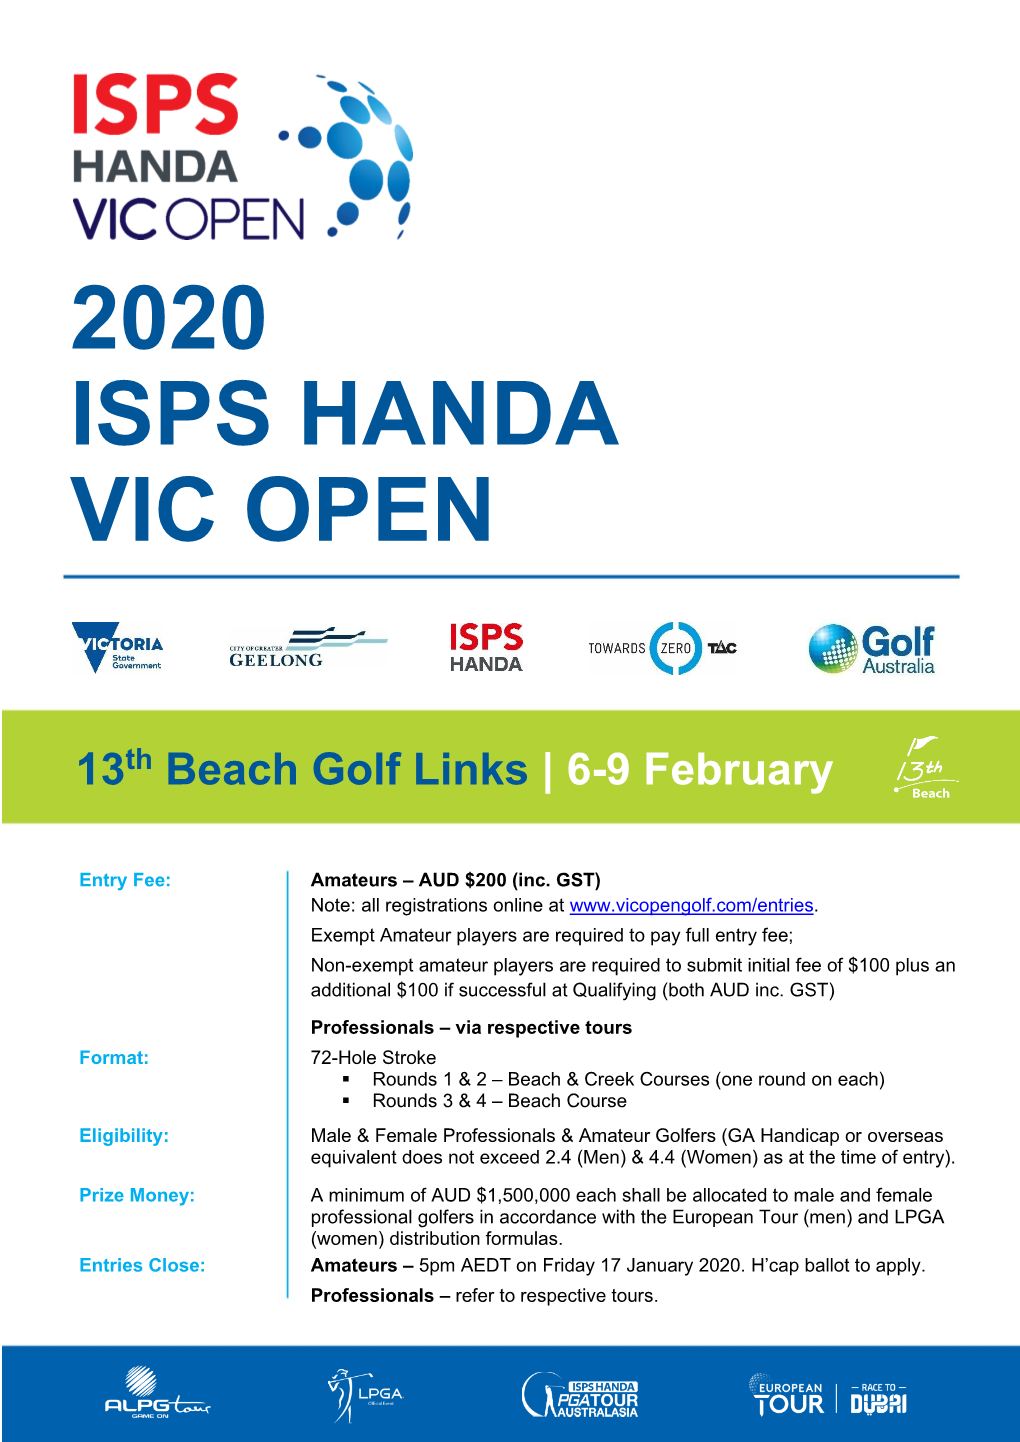 2020 Isps Handa Vic Open – Terms of Competition